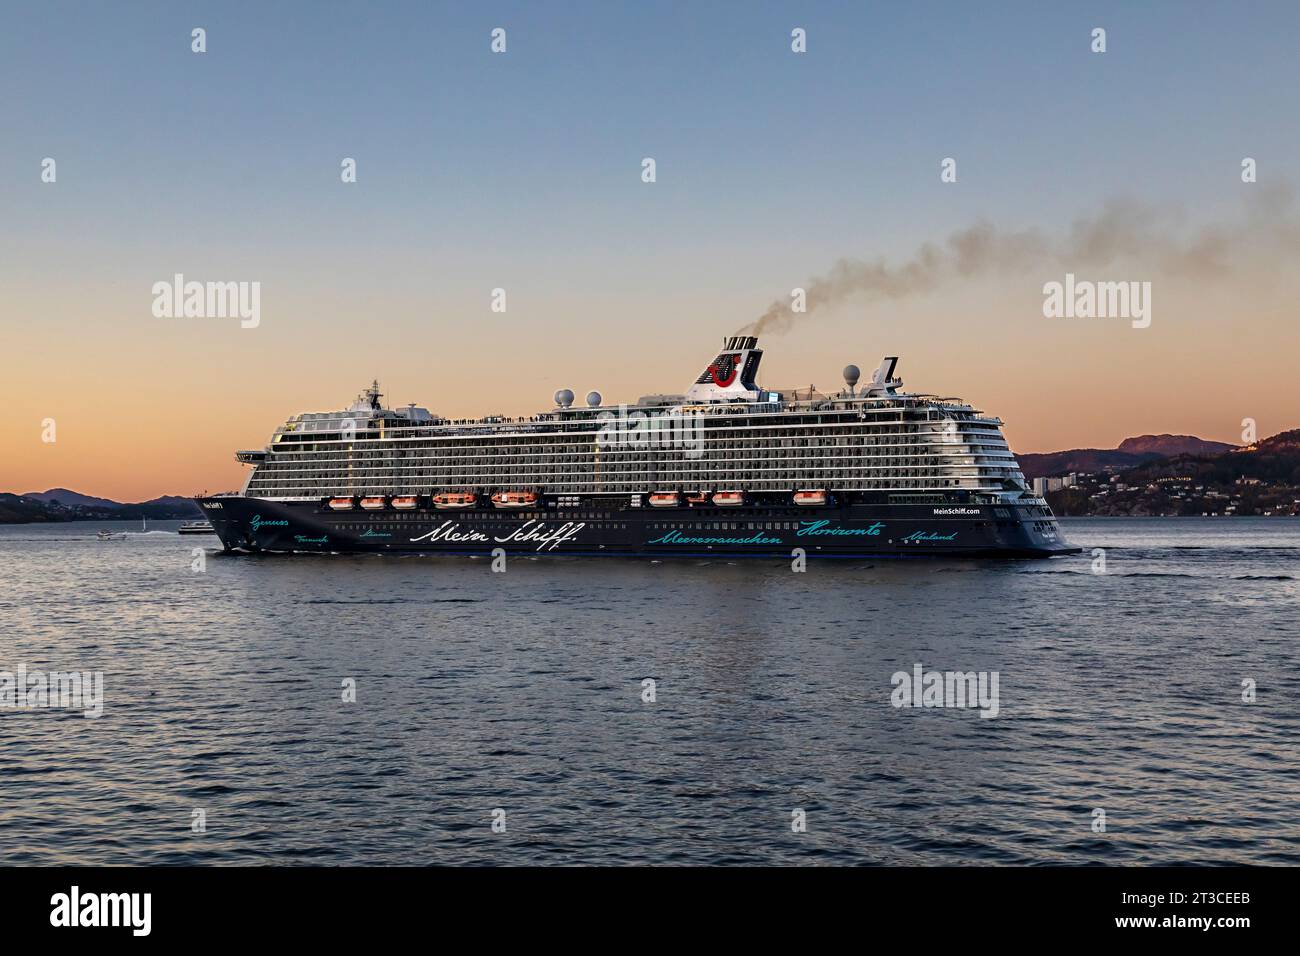 Cruise ship Mein Schiff 3 at Byfjorden, departing late evening from the port of Bergen, Norway. Stock Photo